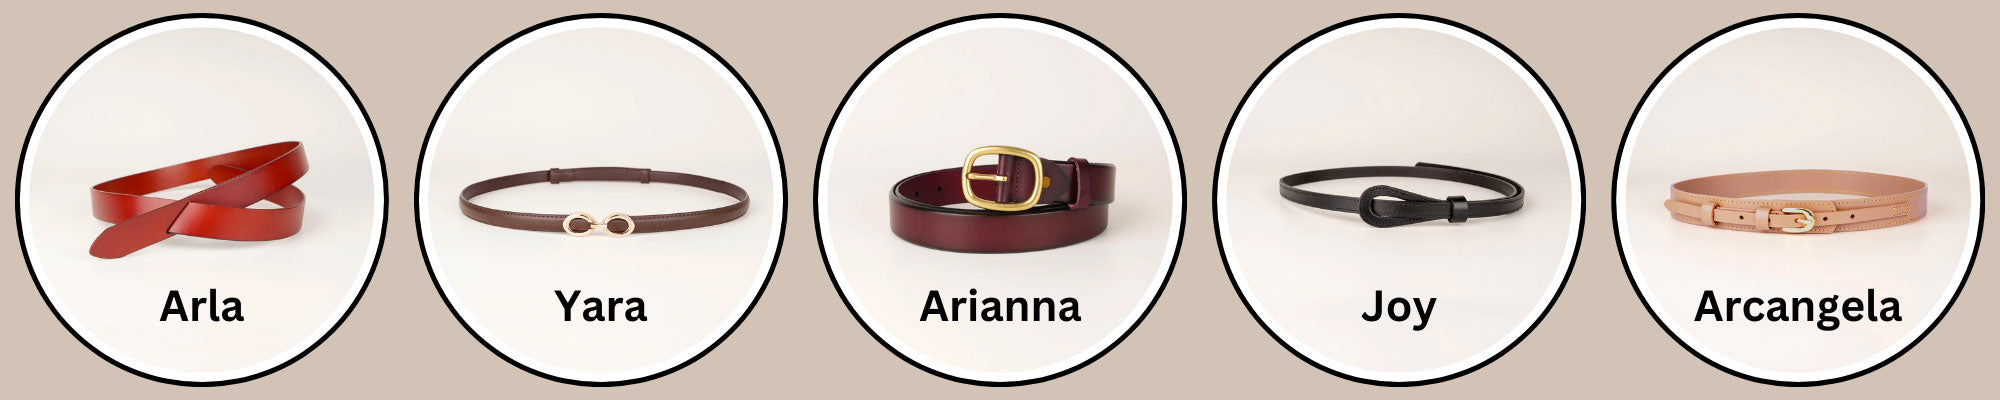 5 Must-Have Leather Belt Styles for the Modern Australian Woman Image 1